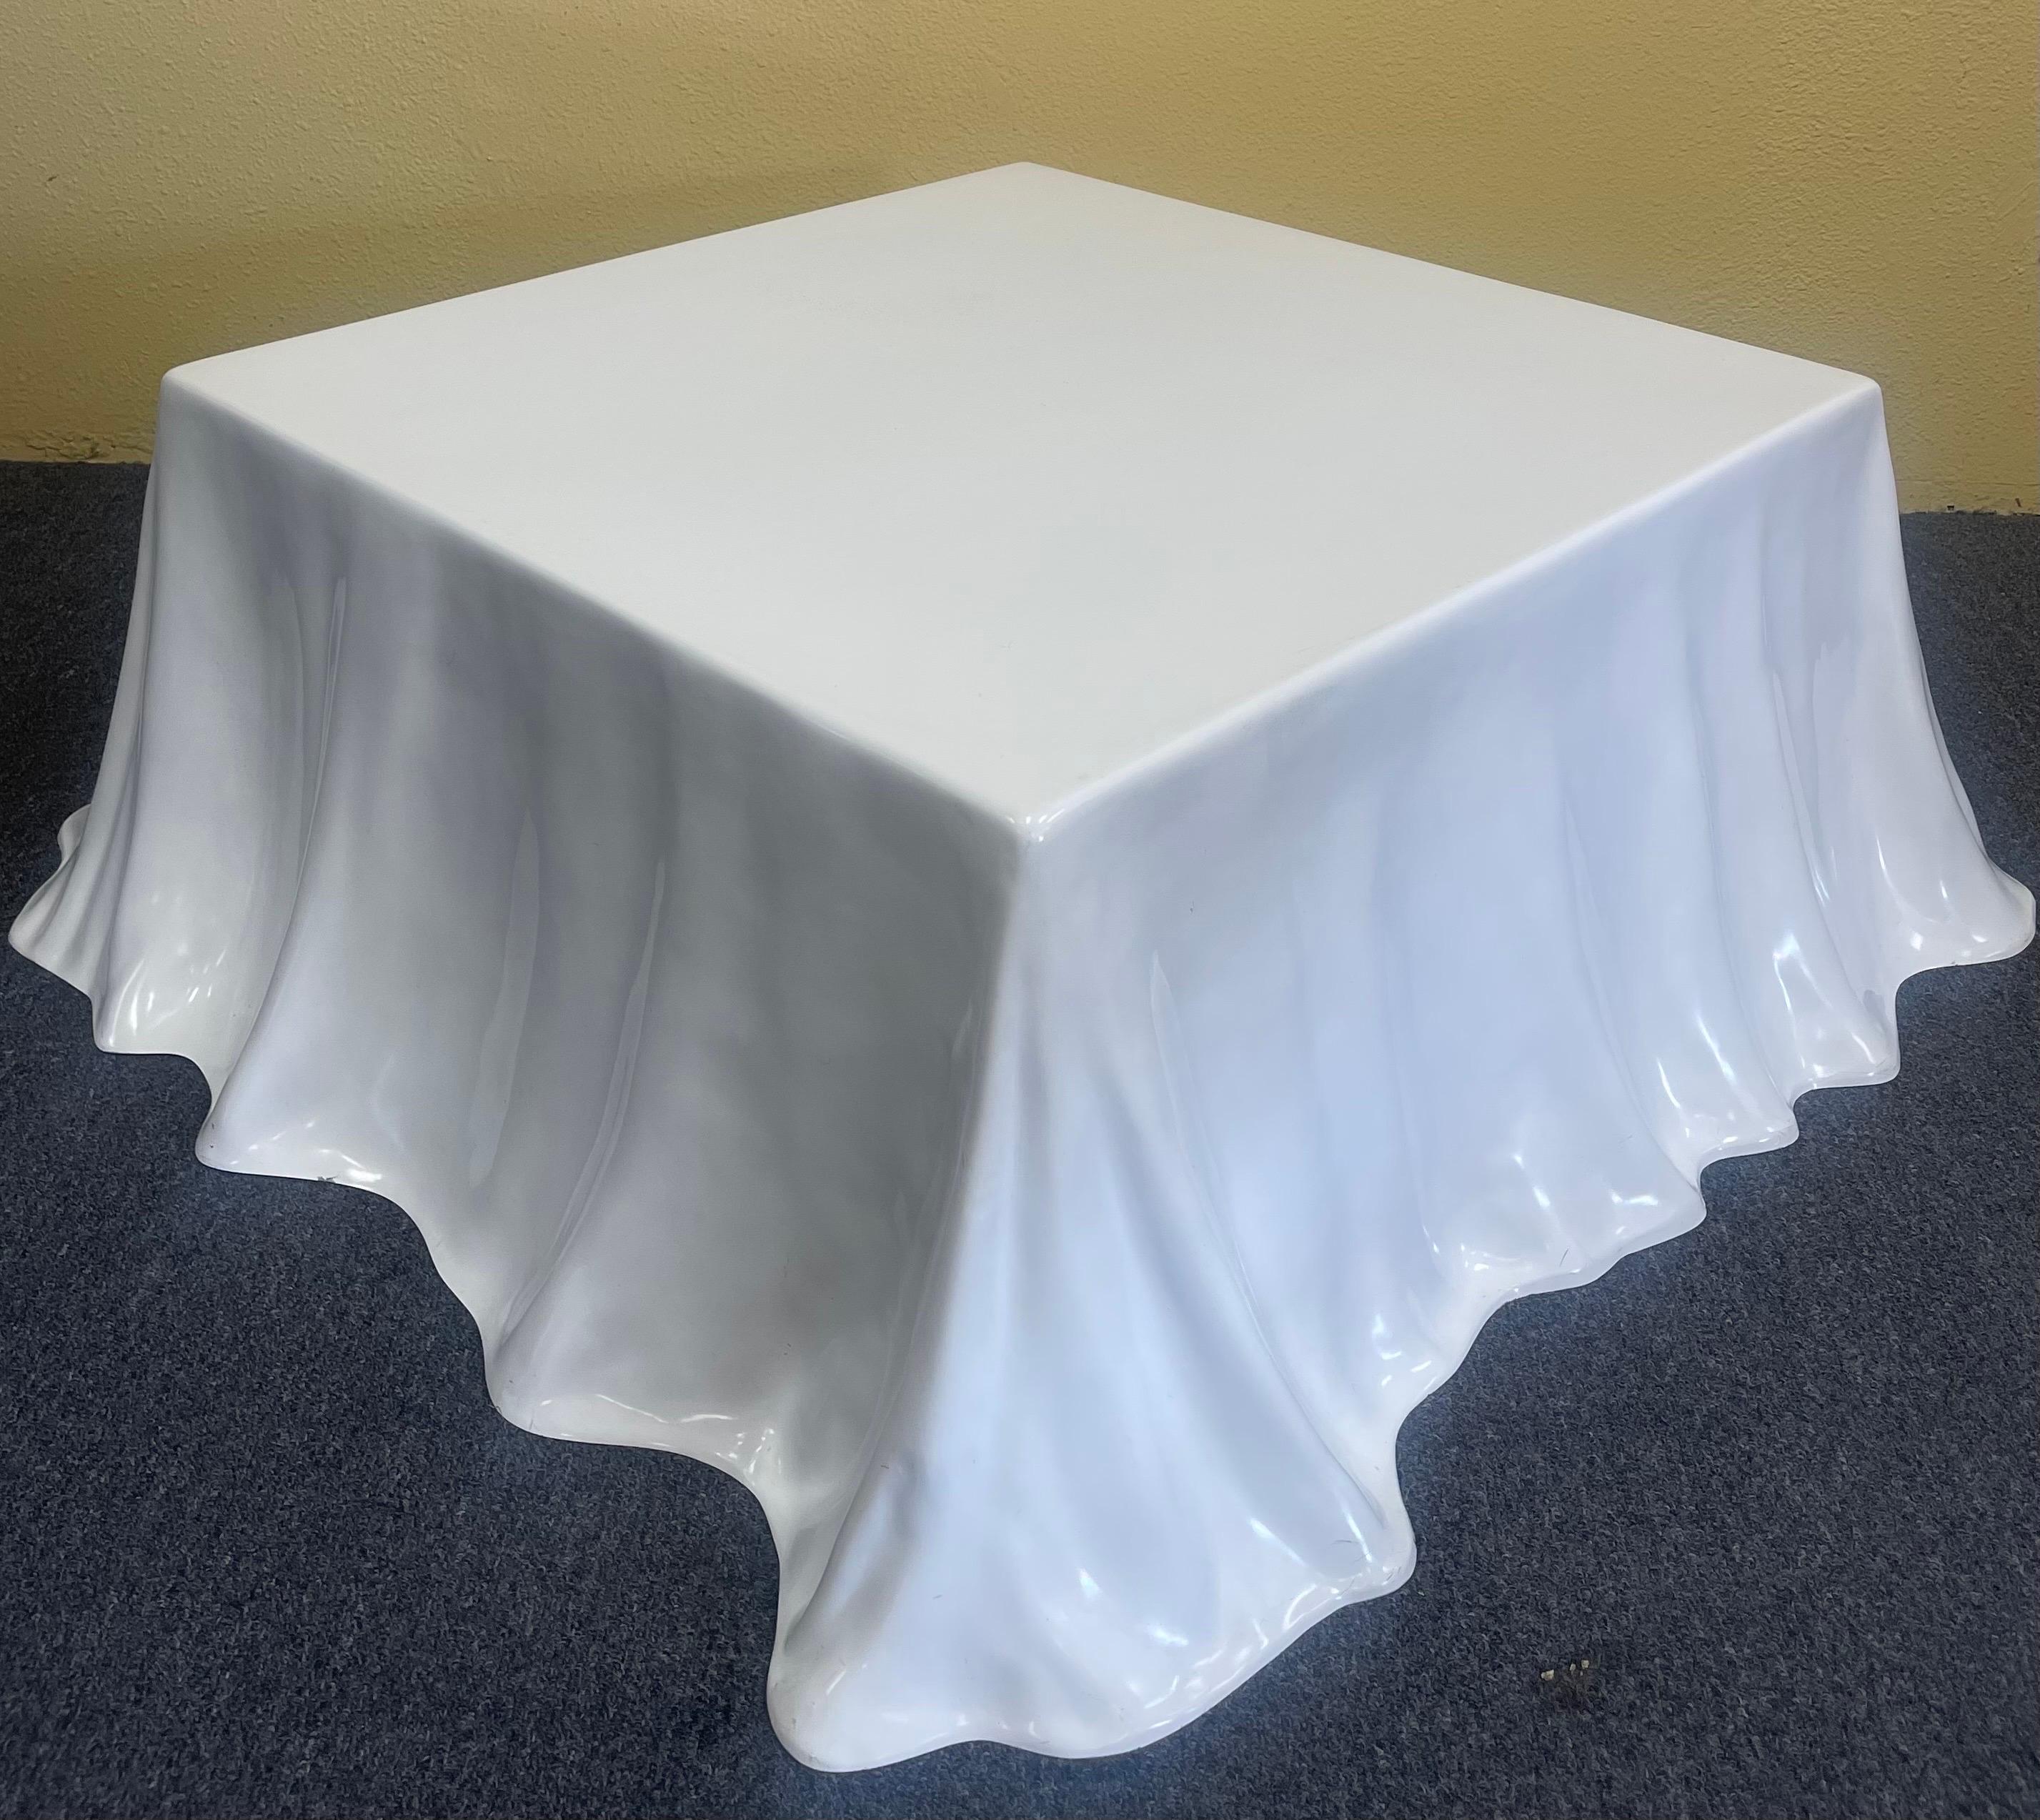 Super rare ‘Tovaglia’ or tablecloth coffee table designed by Studio Tetrarch and produced in limited quantities by Alberto Bazzani in 1969. Imported from Italy by Stendig, the table is crafted from gel coated fiberglass. The table is in very good